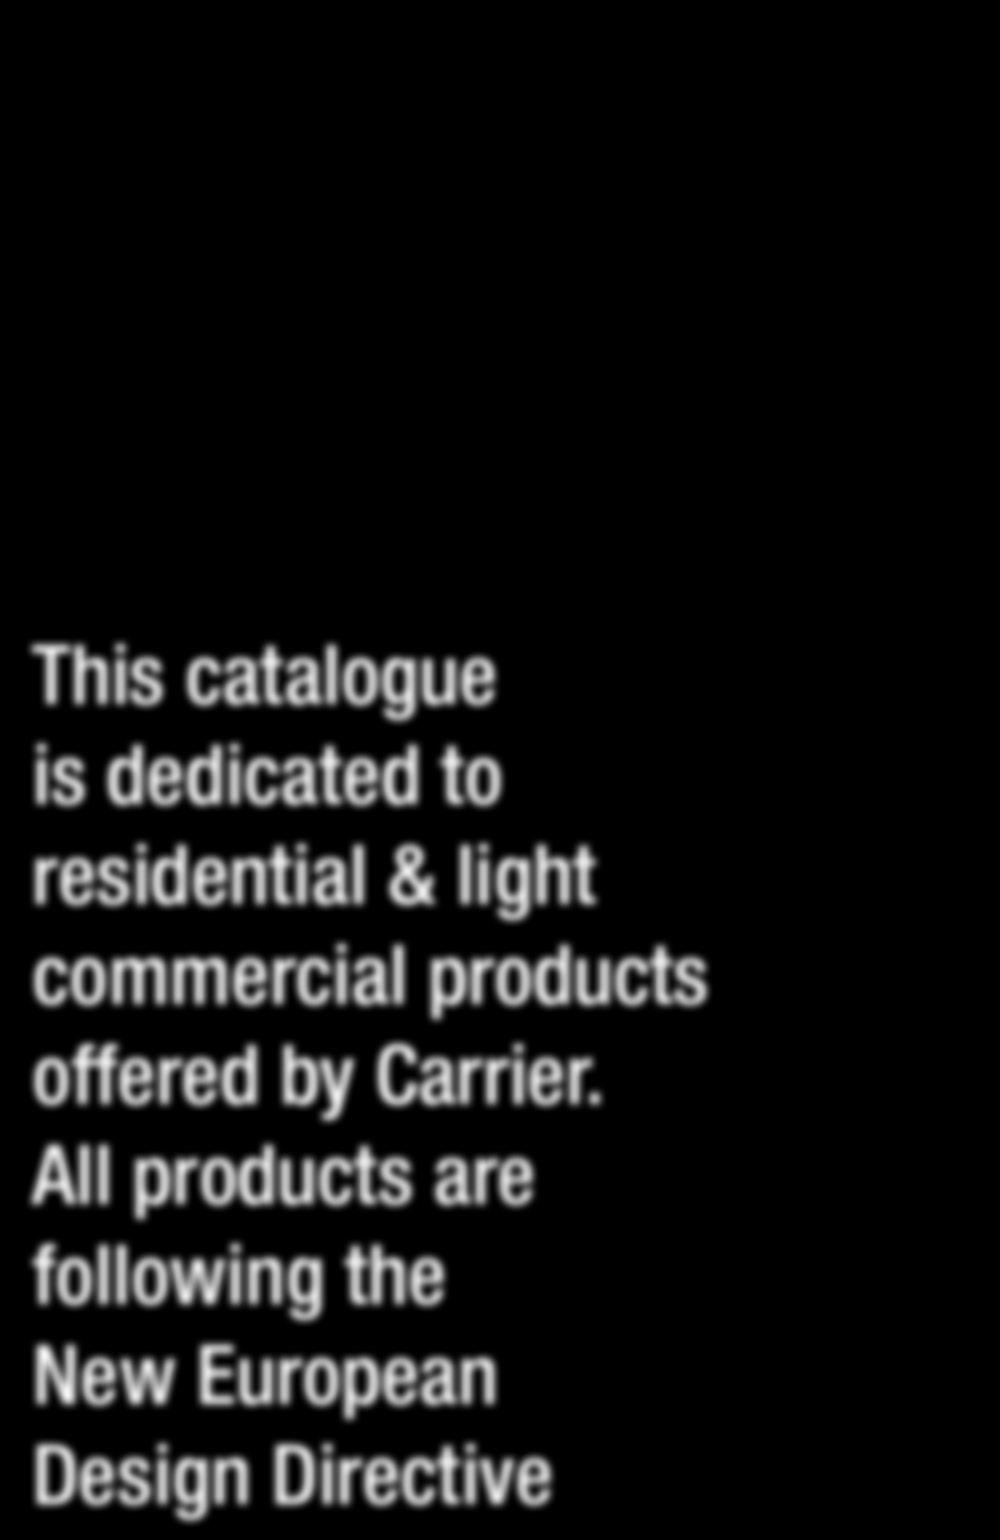 products offered by Carrier.